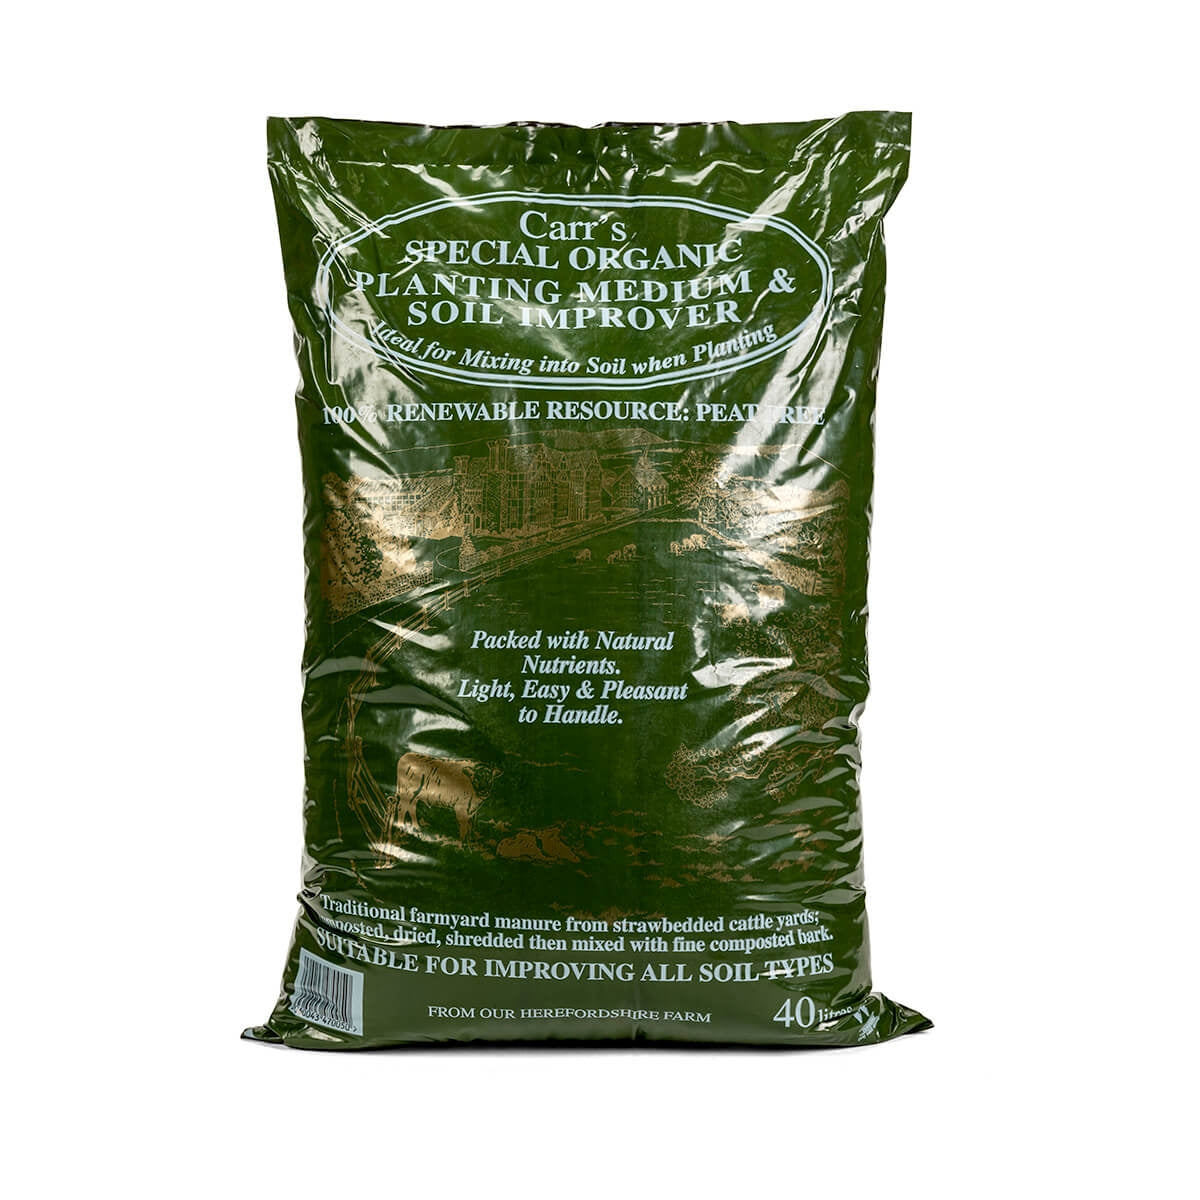 Carr’s Special Organic Soil Improver